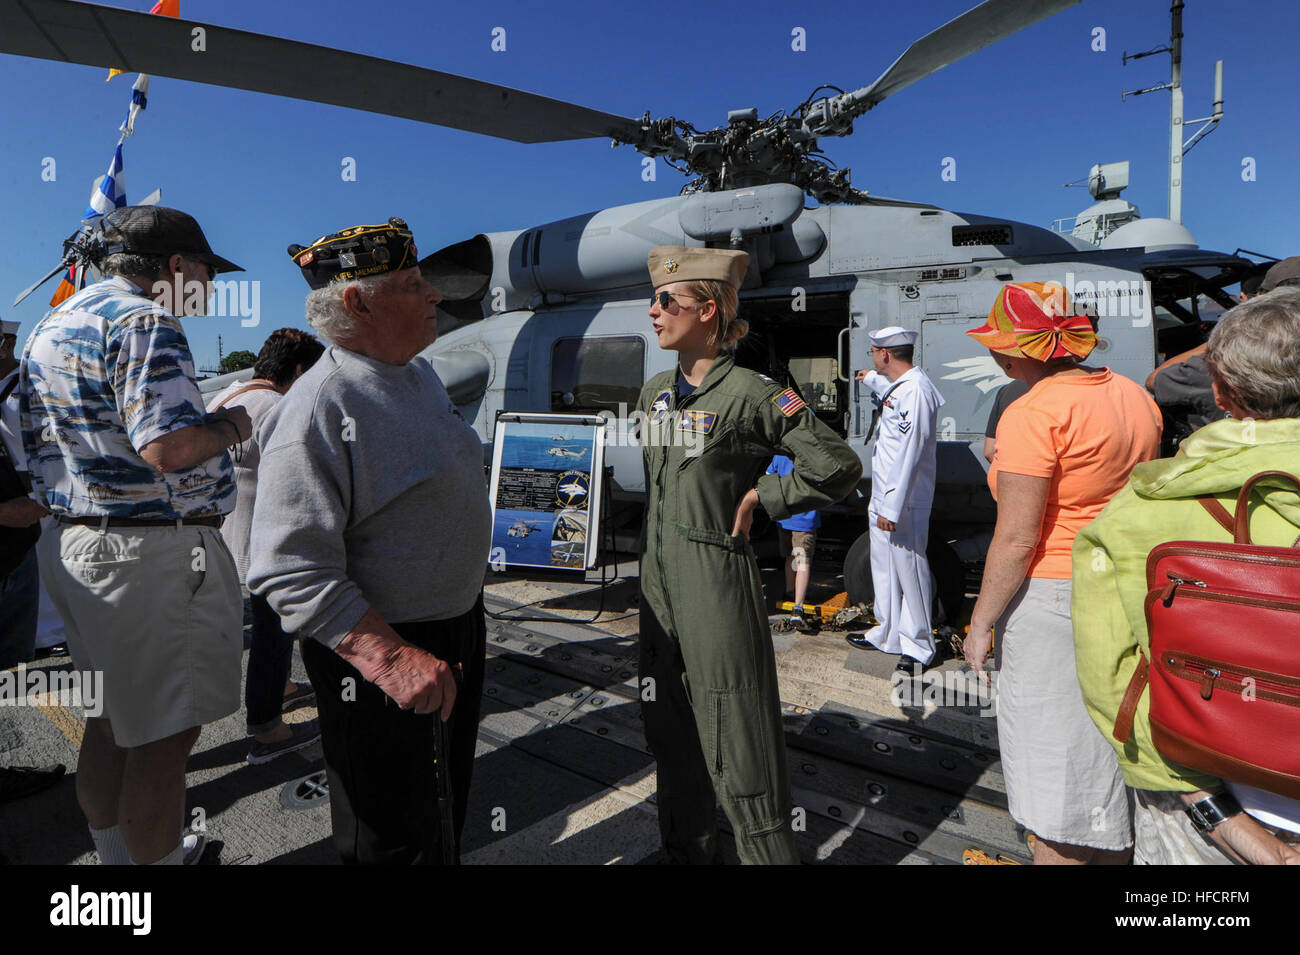 150606-N-OO032-006 PORTLAND, Ore. (June 5, 2015) Lt. Jessica Joses, a Burbank, Calif., native assigned to Helicopter Maritime Strike Squadron 75 (HSM 75), discusses her job as an aviator with a Navy veteran as part of a tour aboard USS Cape St. George (CG 71) during Portland Fleet Week and the 106th annual Rose Festival. The festival and Portland Fleet Week are a celebration of the sea services, with Sailors, Marines and Coast Guardsmen from the U.S. and Canada making the city a port of call. (U.S. Navy Photo by Mass Communication Specialist 2nd Class Cory Asato/Released) Portland Fleet Week t Stock Photo